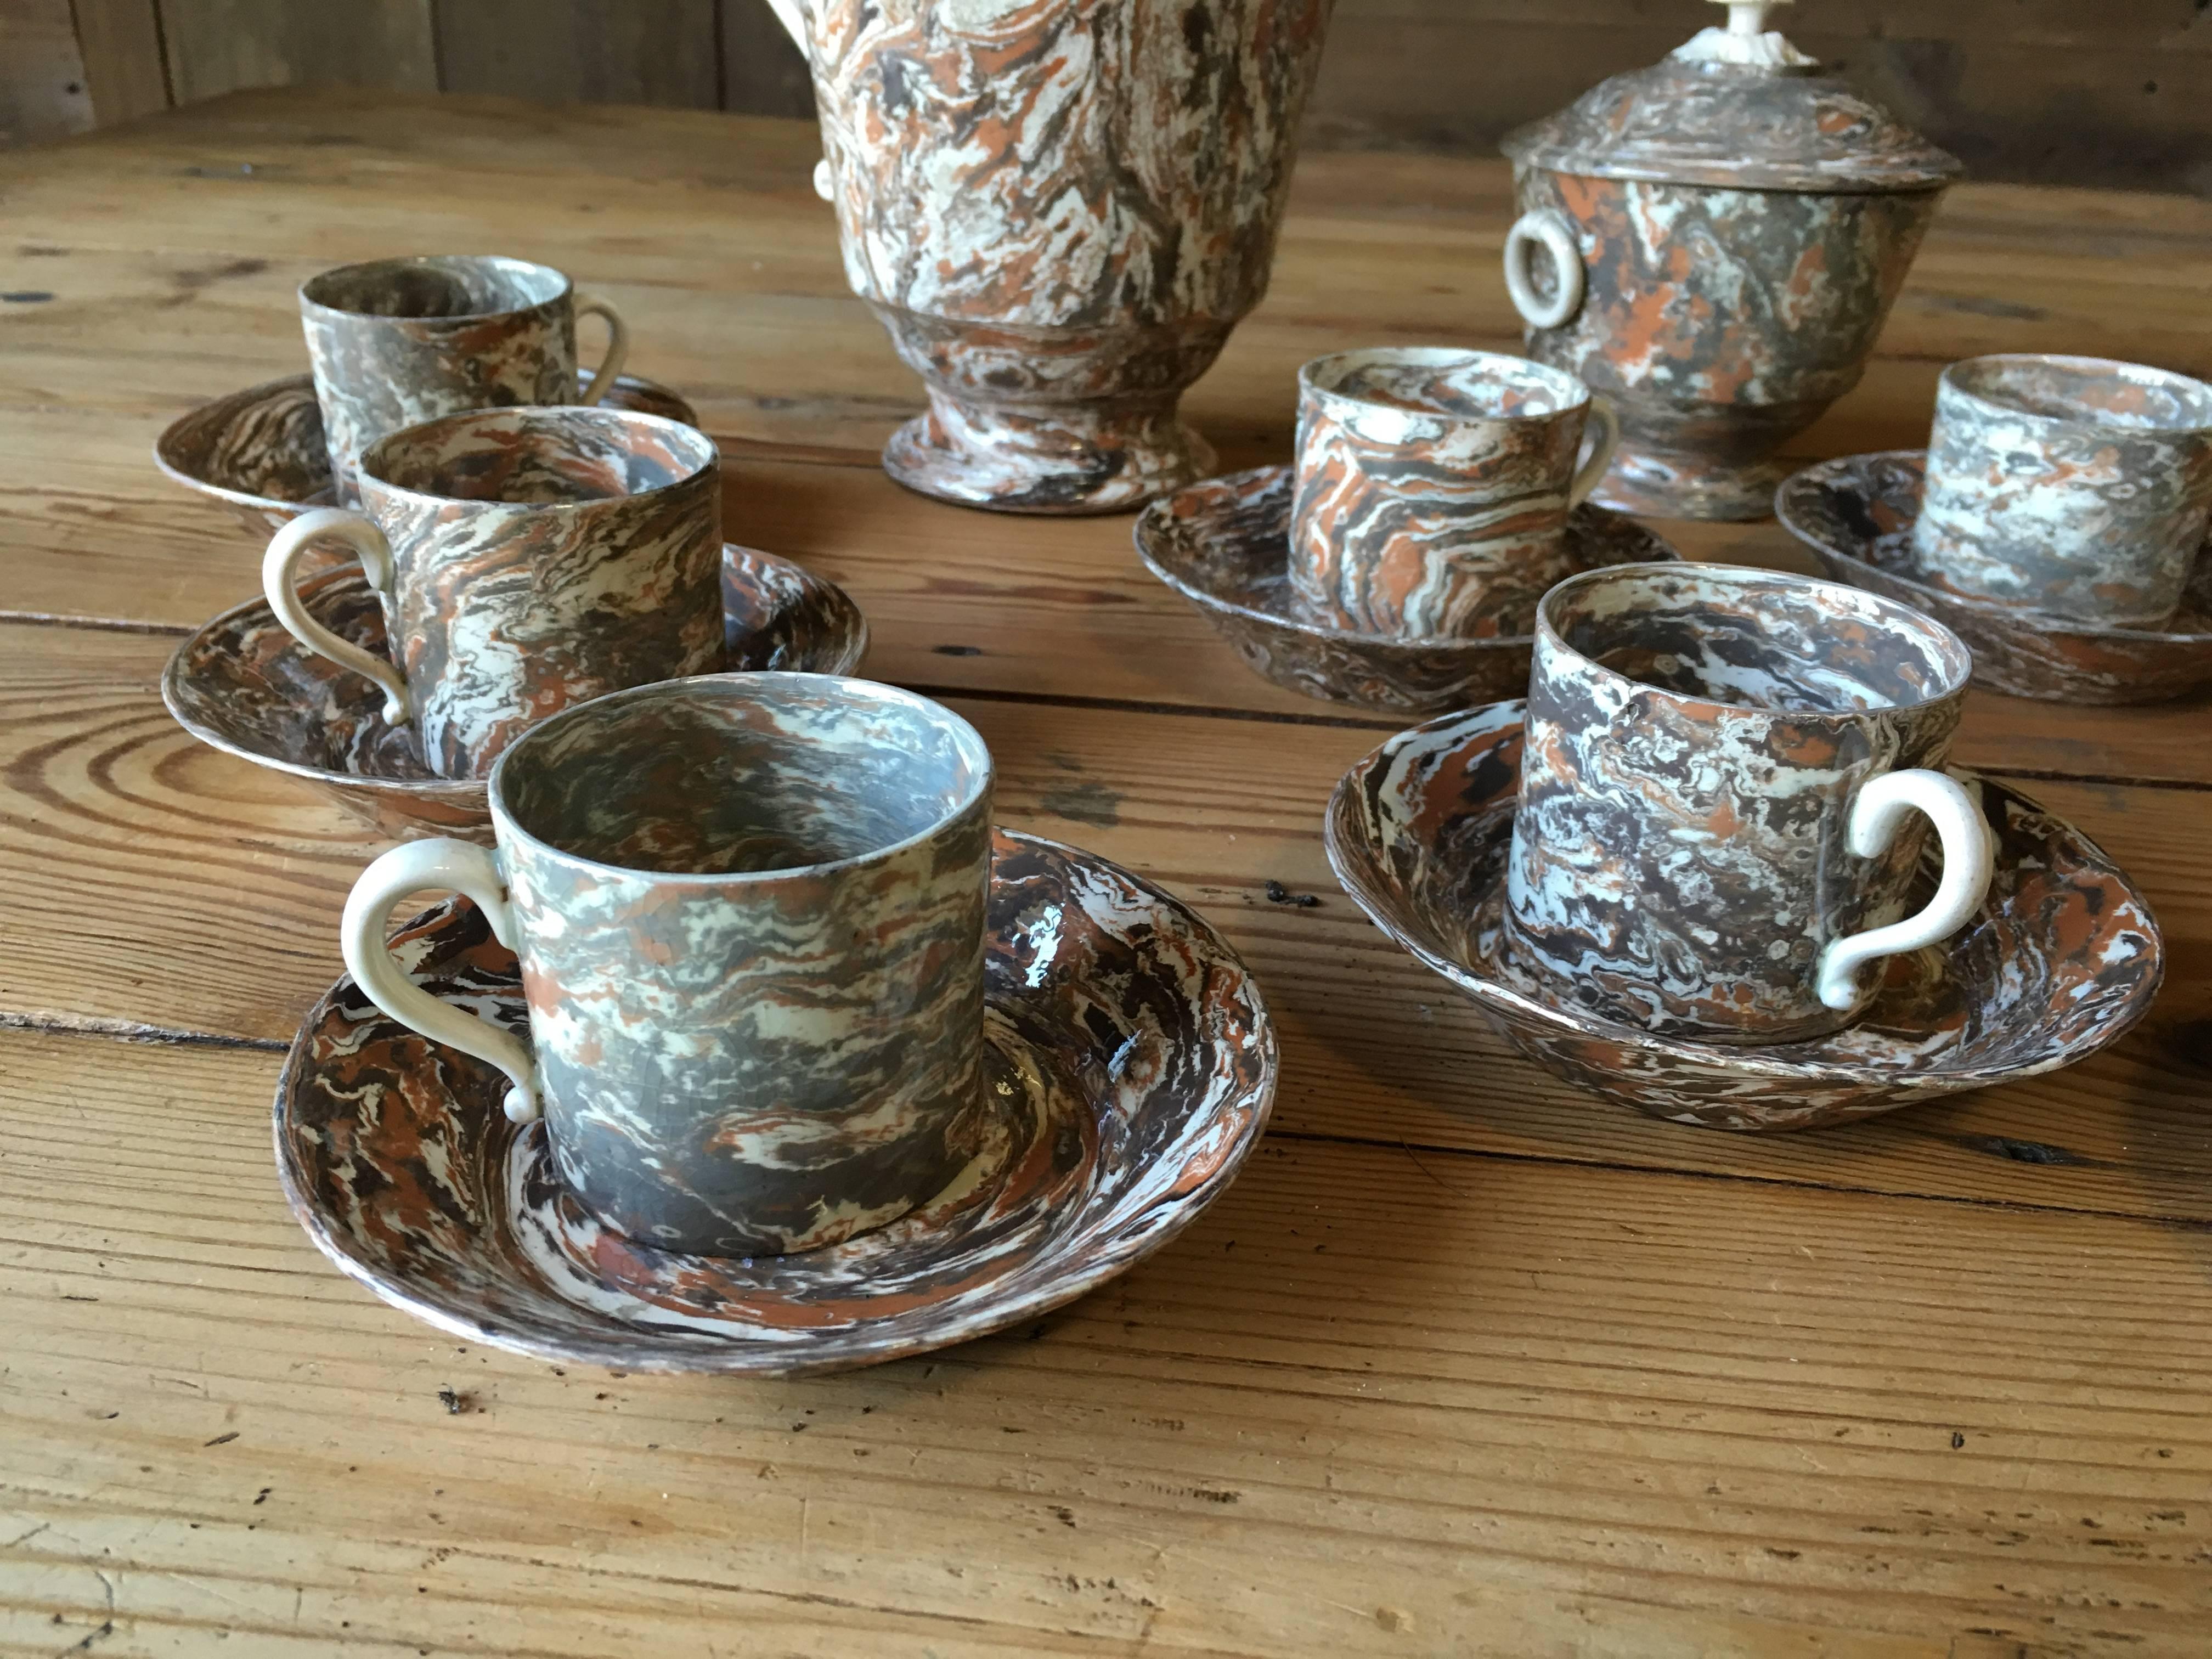 Glazed Rare Early 19th Century Demitasse Coffee Set from Apt, France